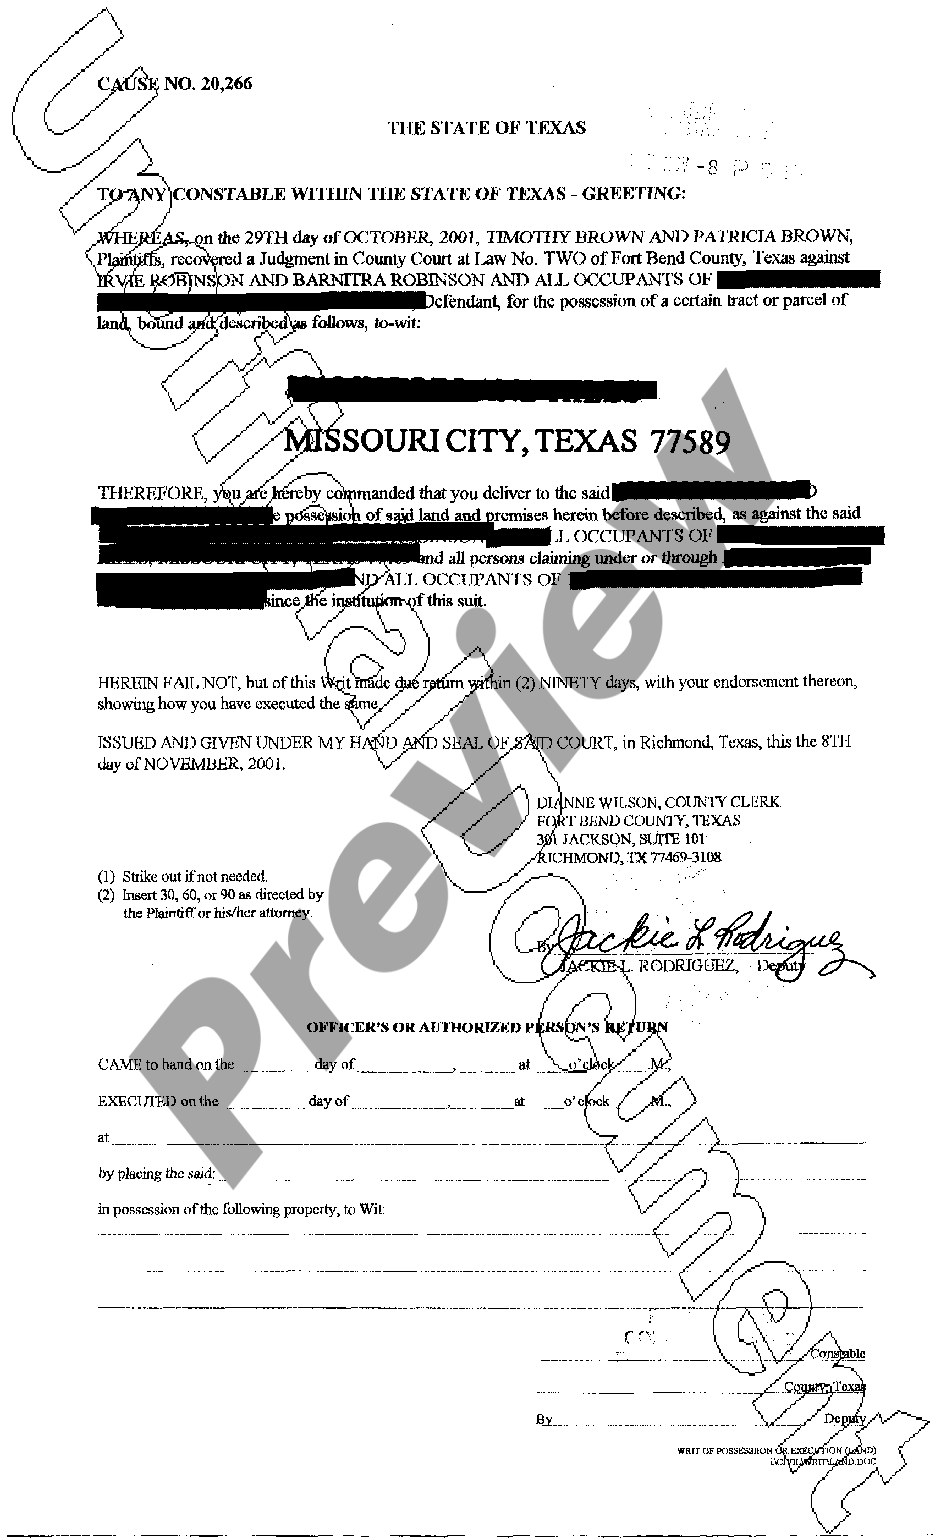 mcallen-texas-writ-of-possession-texas-writ-of-possession-us-legal